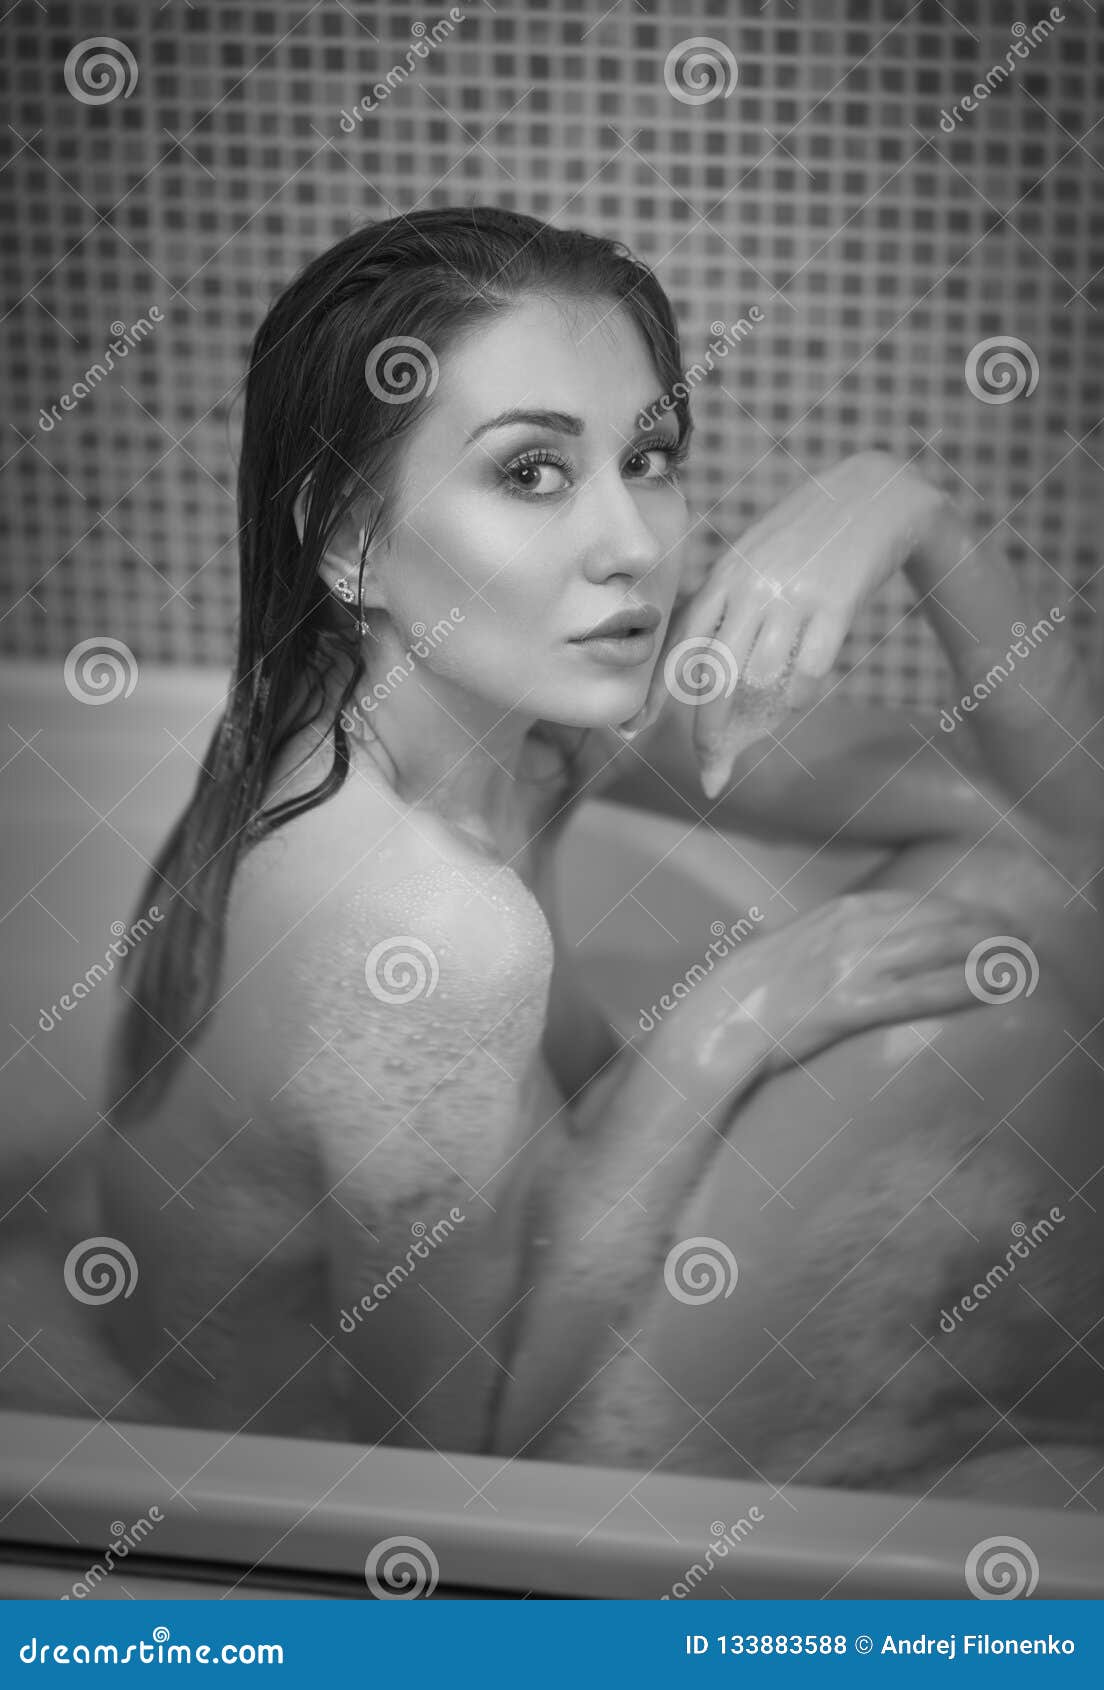 naked girl takeing a bath